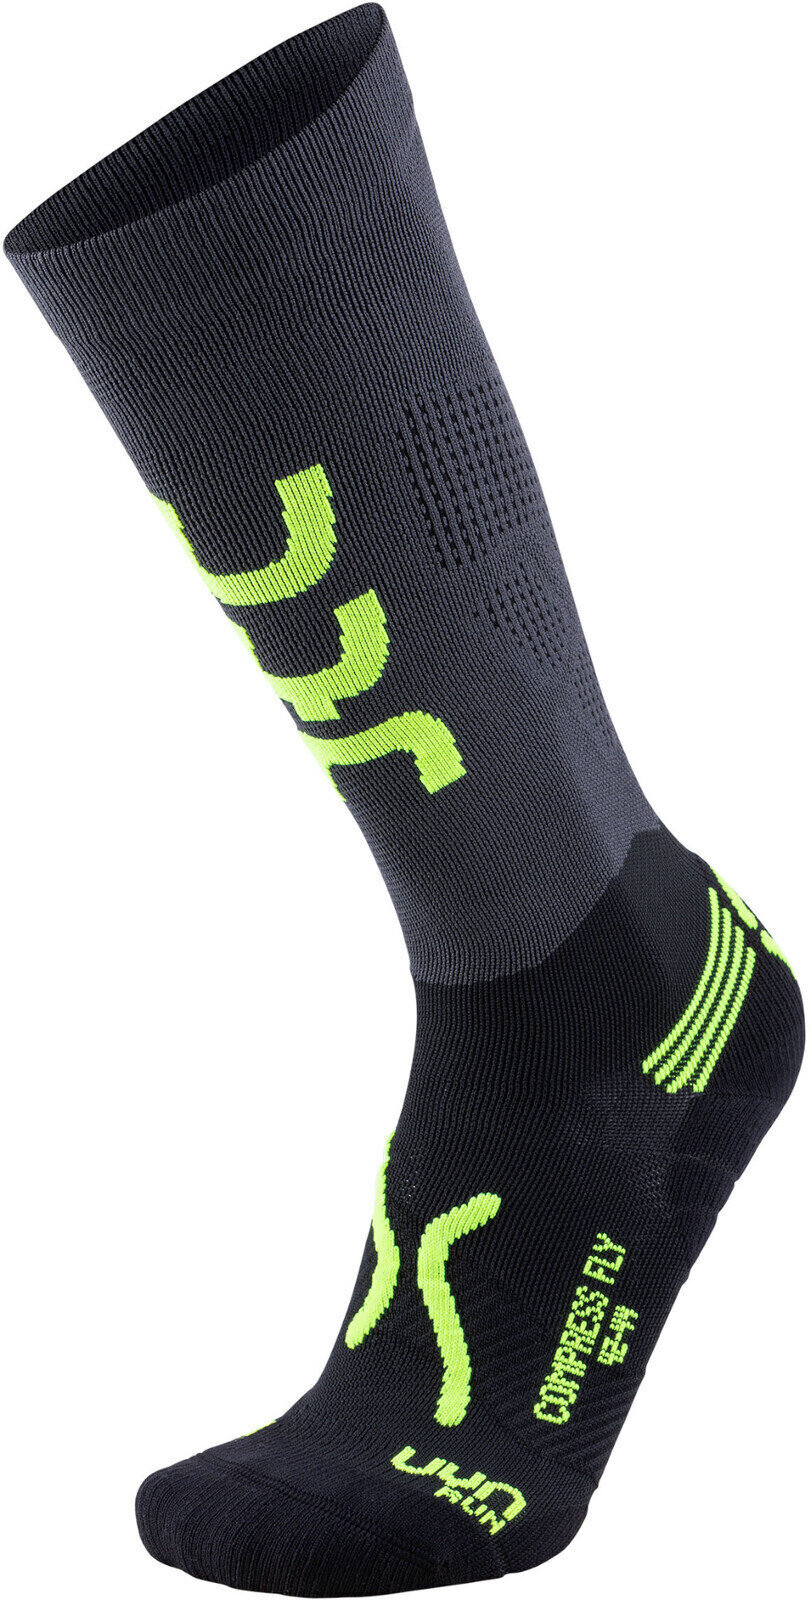 Calcetines para correr UYN Run Compression Fly Anthracite-Yellow Fluo 42/44 Calcetines para correr